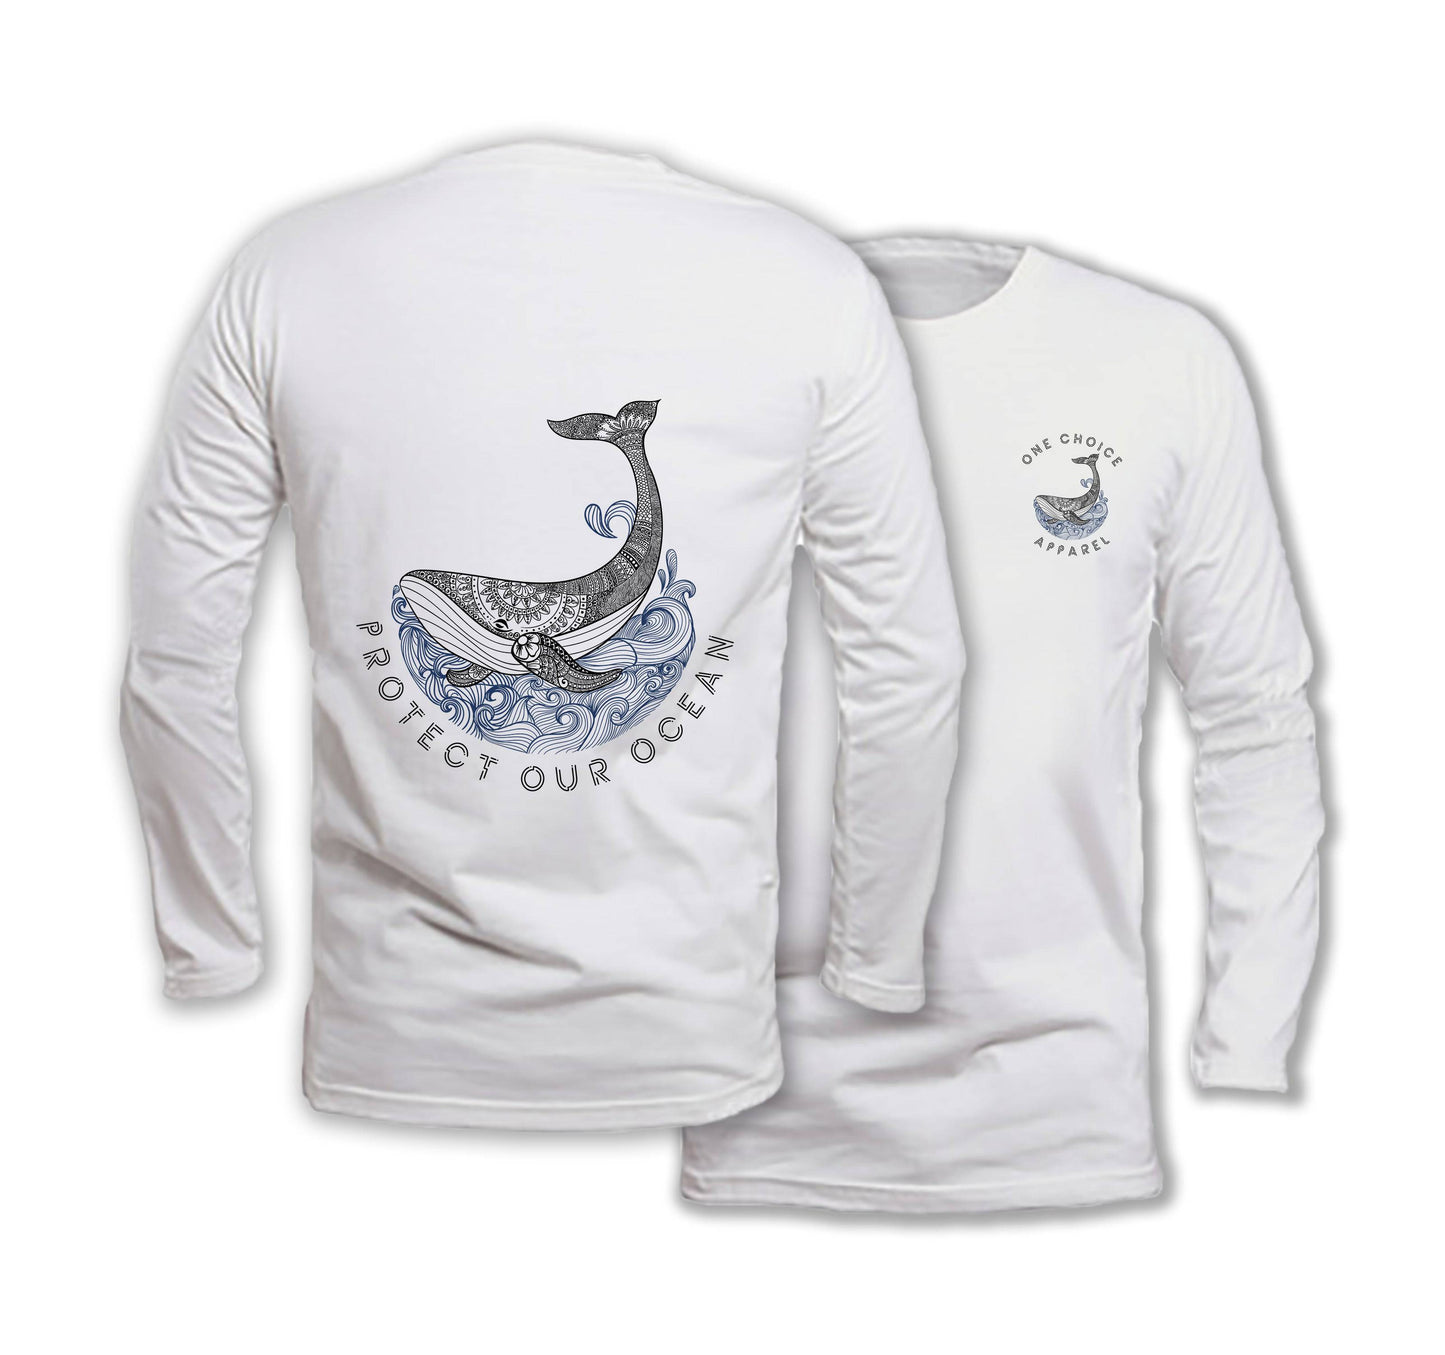 Protect Our Ocean - Long Sleeve Organic Cotton T-Shirt - One Choice Apparel